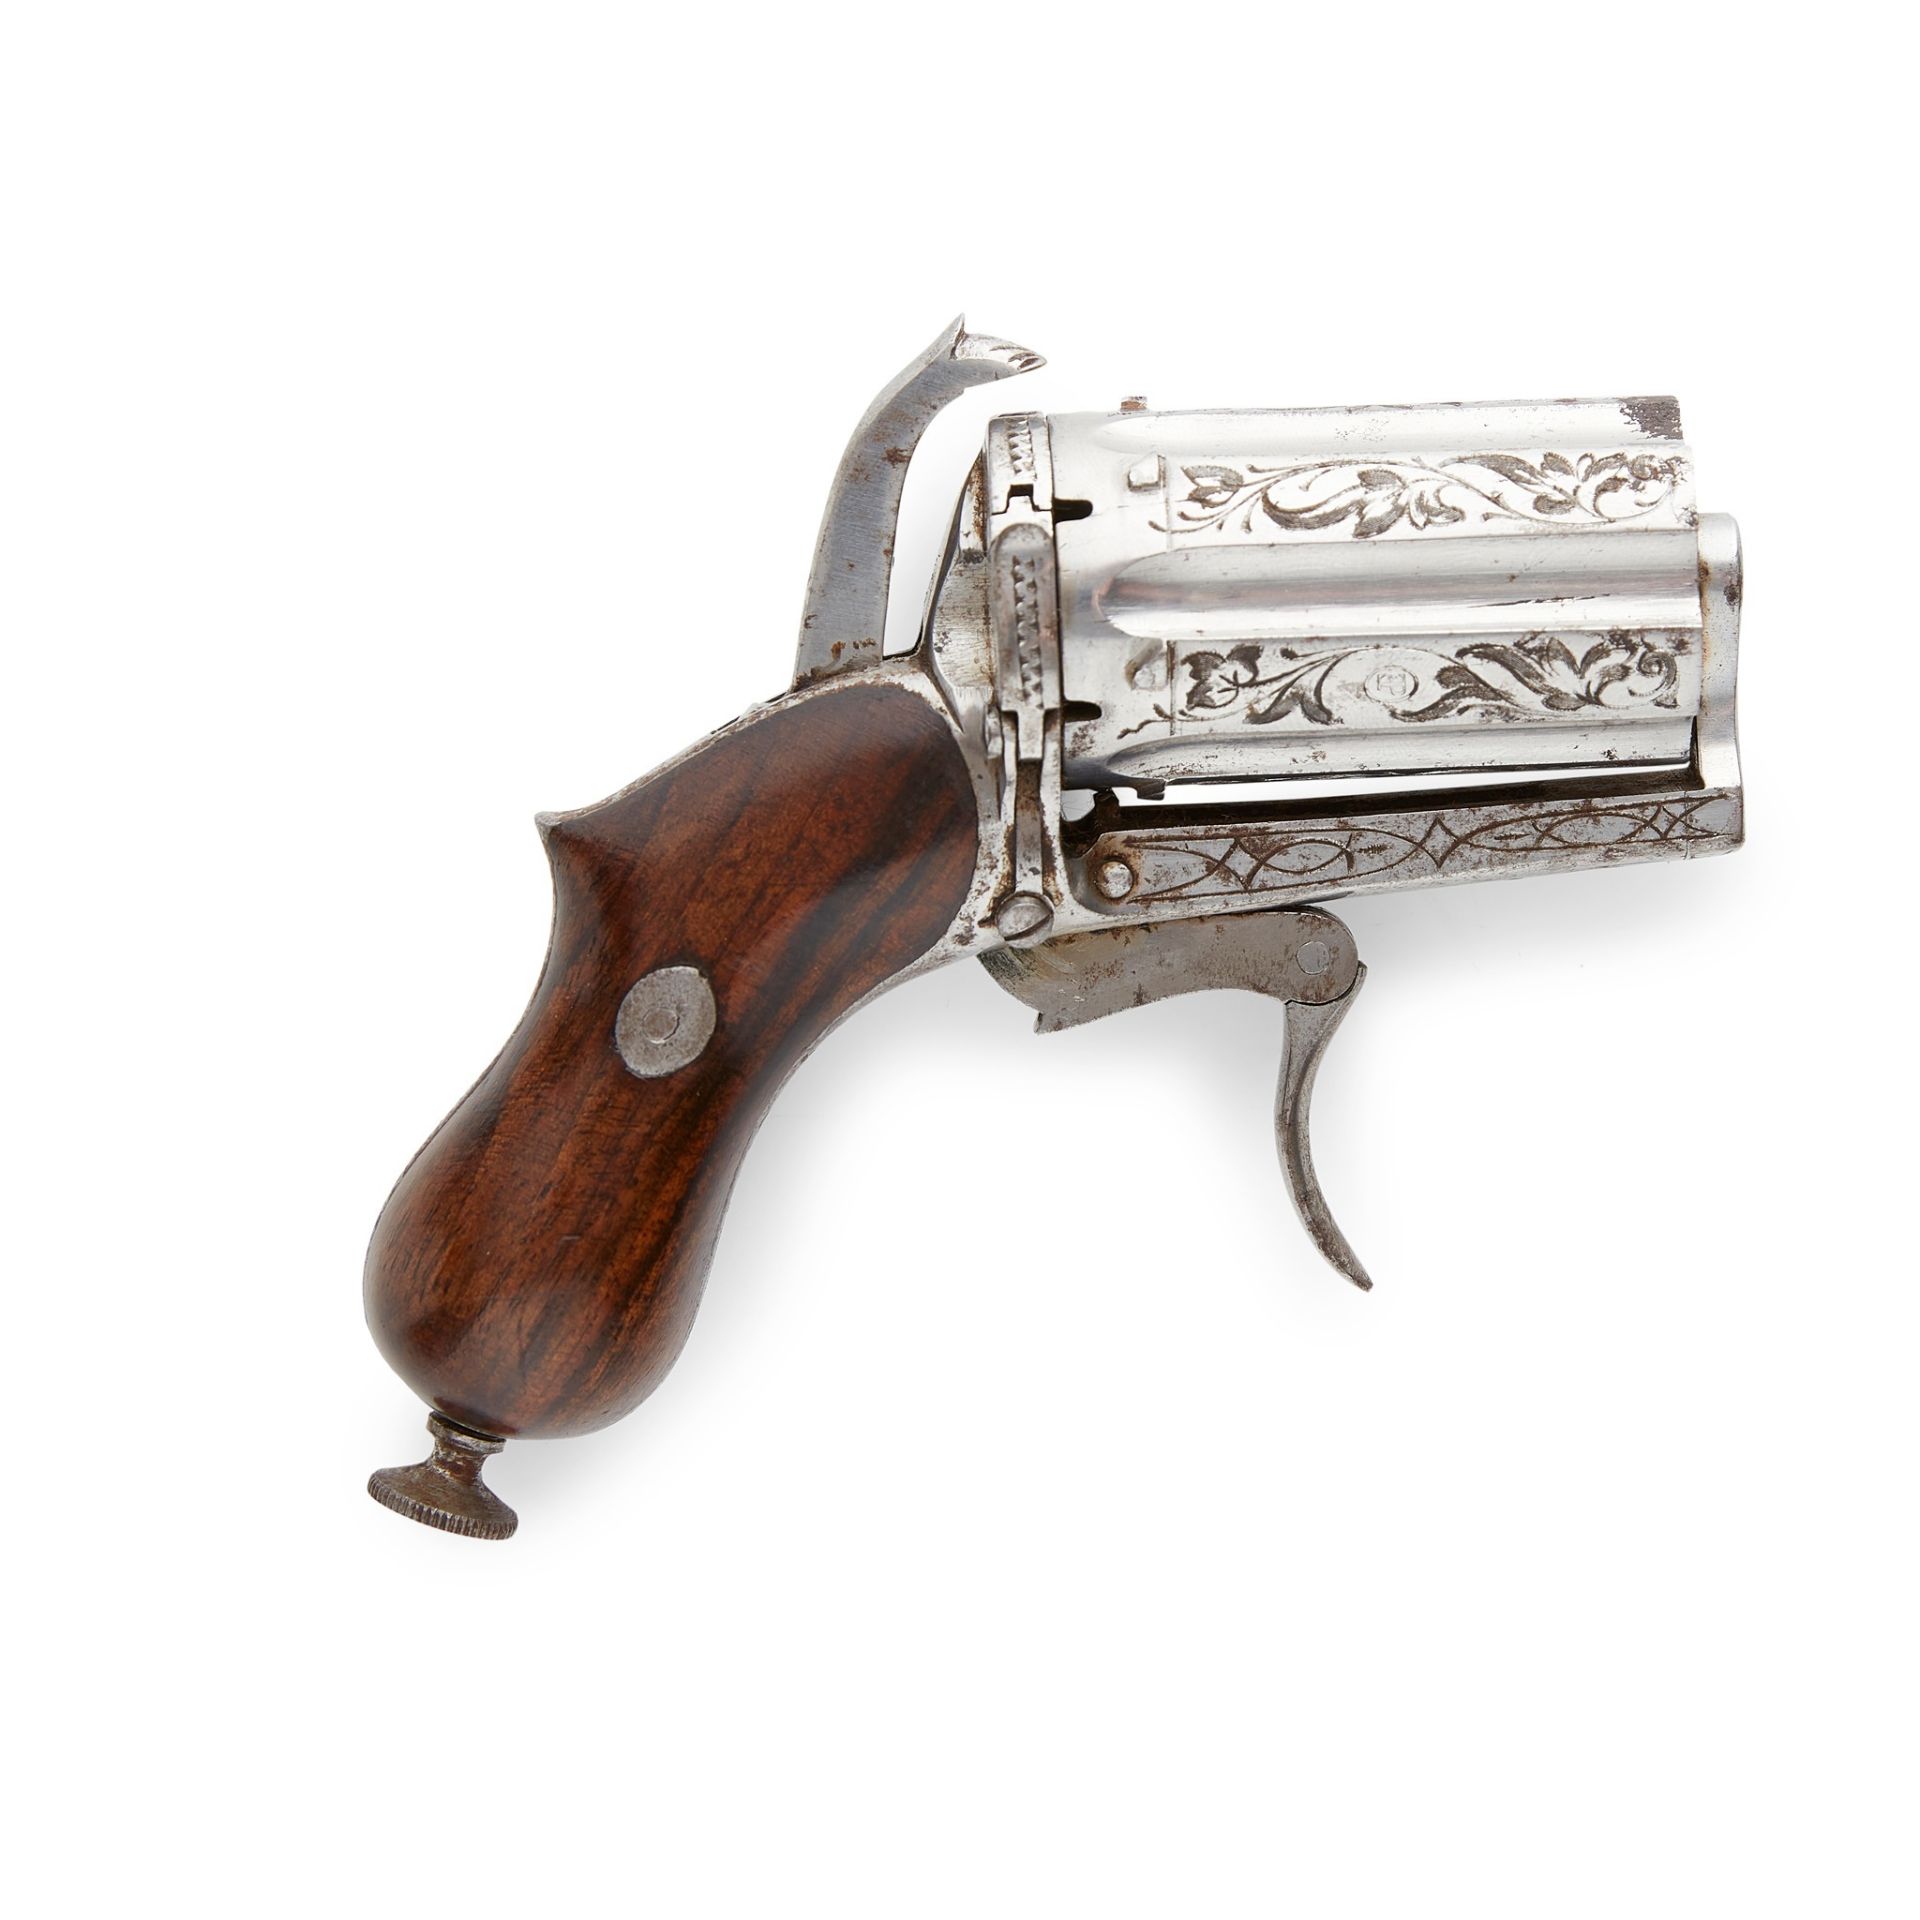 POLISHED STEEL AND ENGRAVED SIX BARREL PIN-FIRE PEPPER BOX TRAVELLING PISTOL 19TH CENTURY